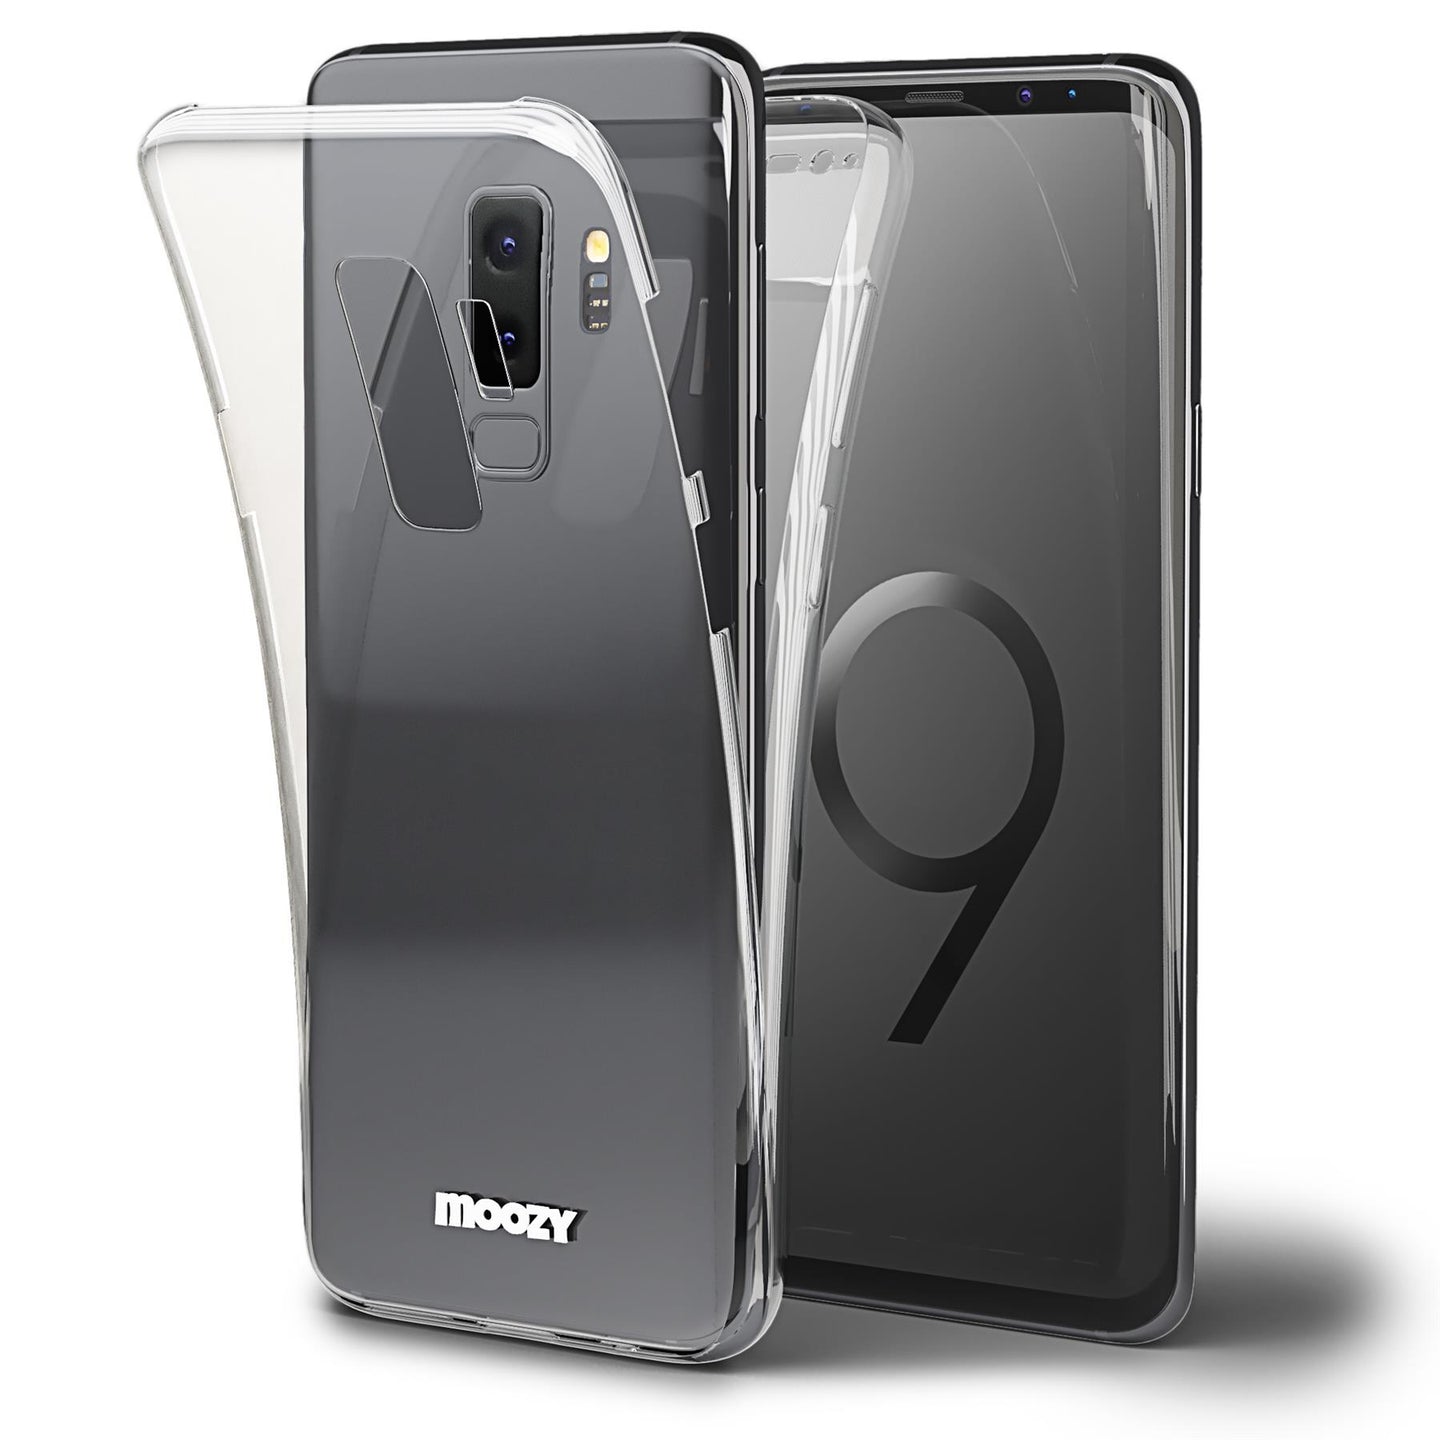 Moozy 360 Degree Case for Samsung S9 Plus - Full body Front and Back Slim Clear Transparent TPU Silicone Gel Cover